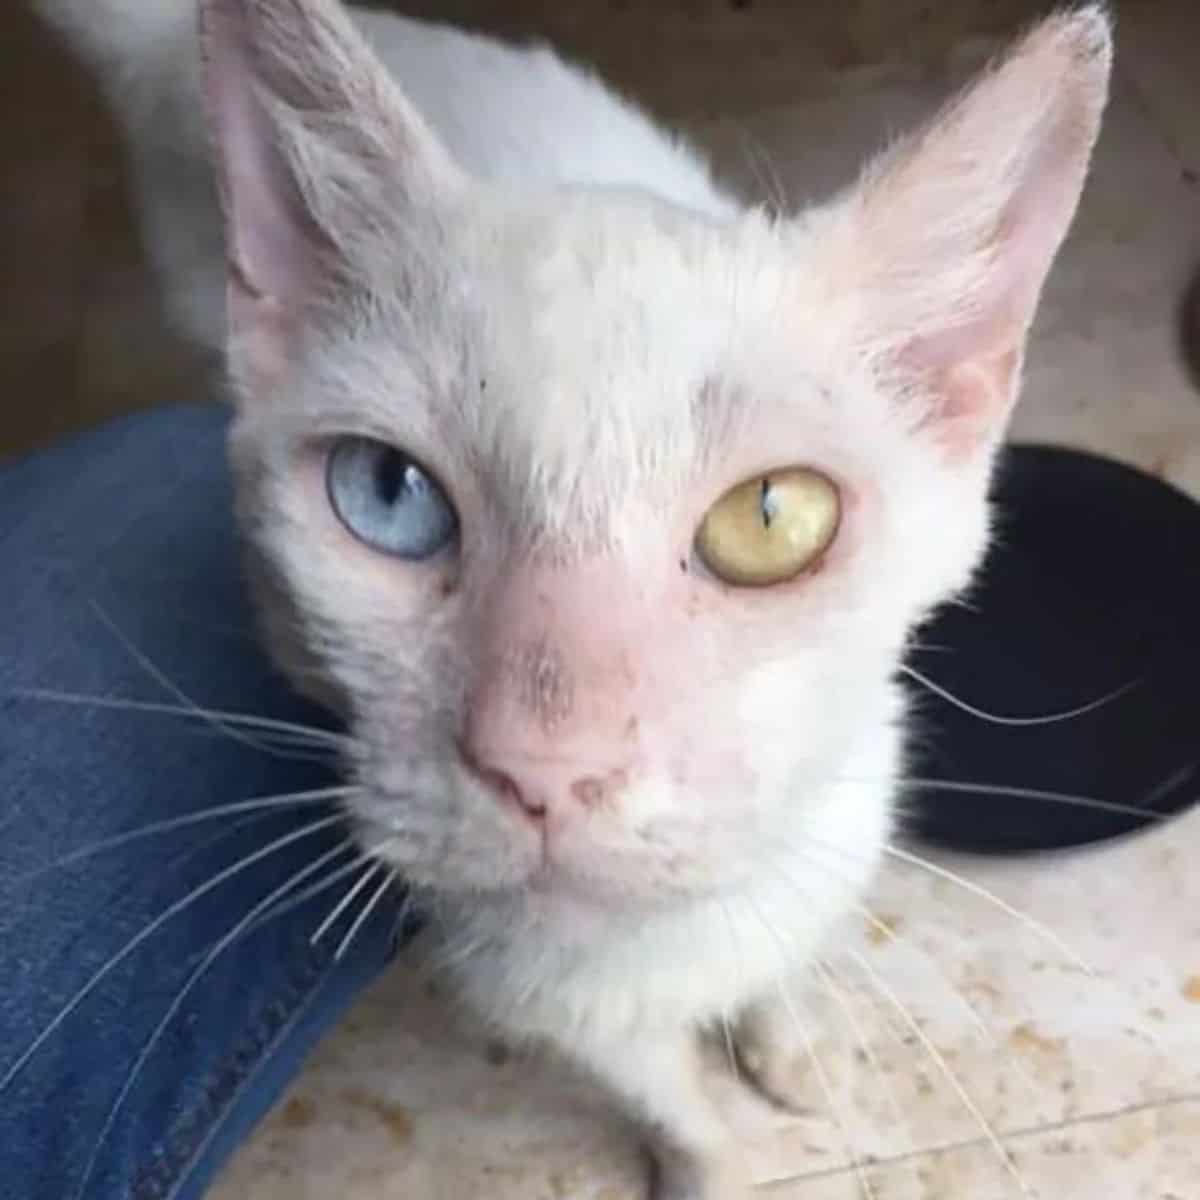 cat with different eye color